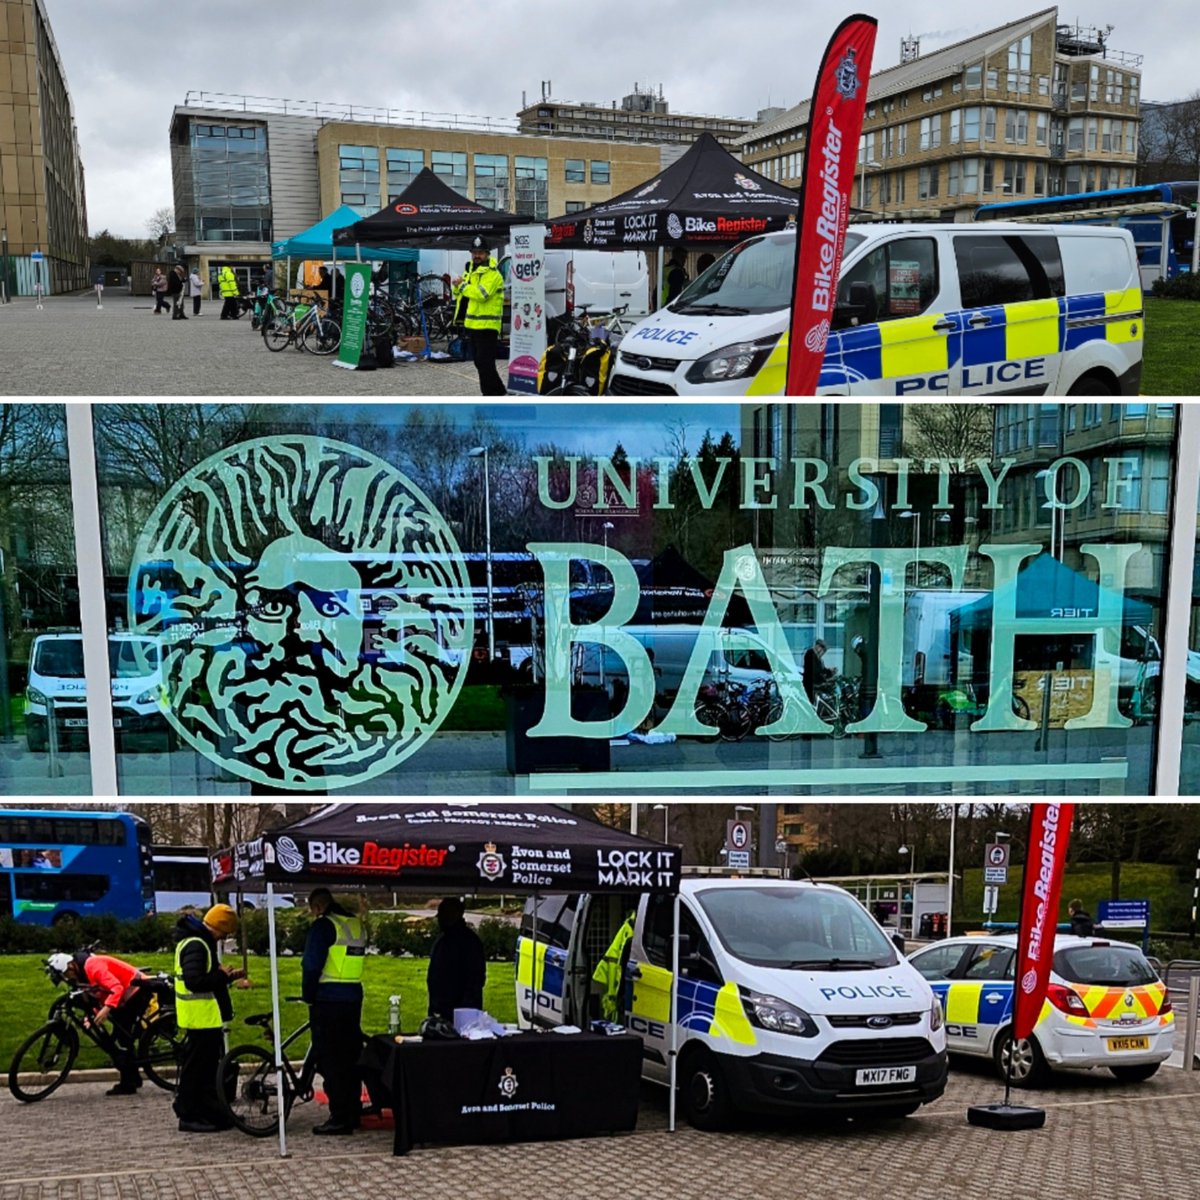 Bath outer Neighbourhood Team have been Bike marking up at #UniversityofBath.
We have been helping with the promotion of active travel and are joined by #juilanhousebikeworkshop #tier #take chargebikes.
#bikeregister. 
👩🏽‍🎓👨🏼‍🎓🚴🏼‍♂️🔐👮🏽👮🏼‍♀️